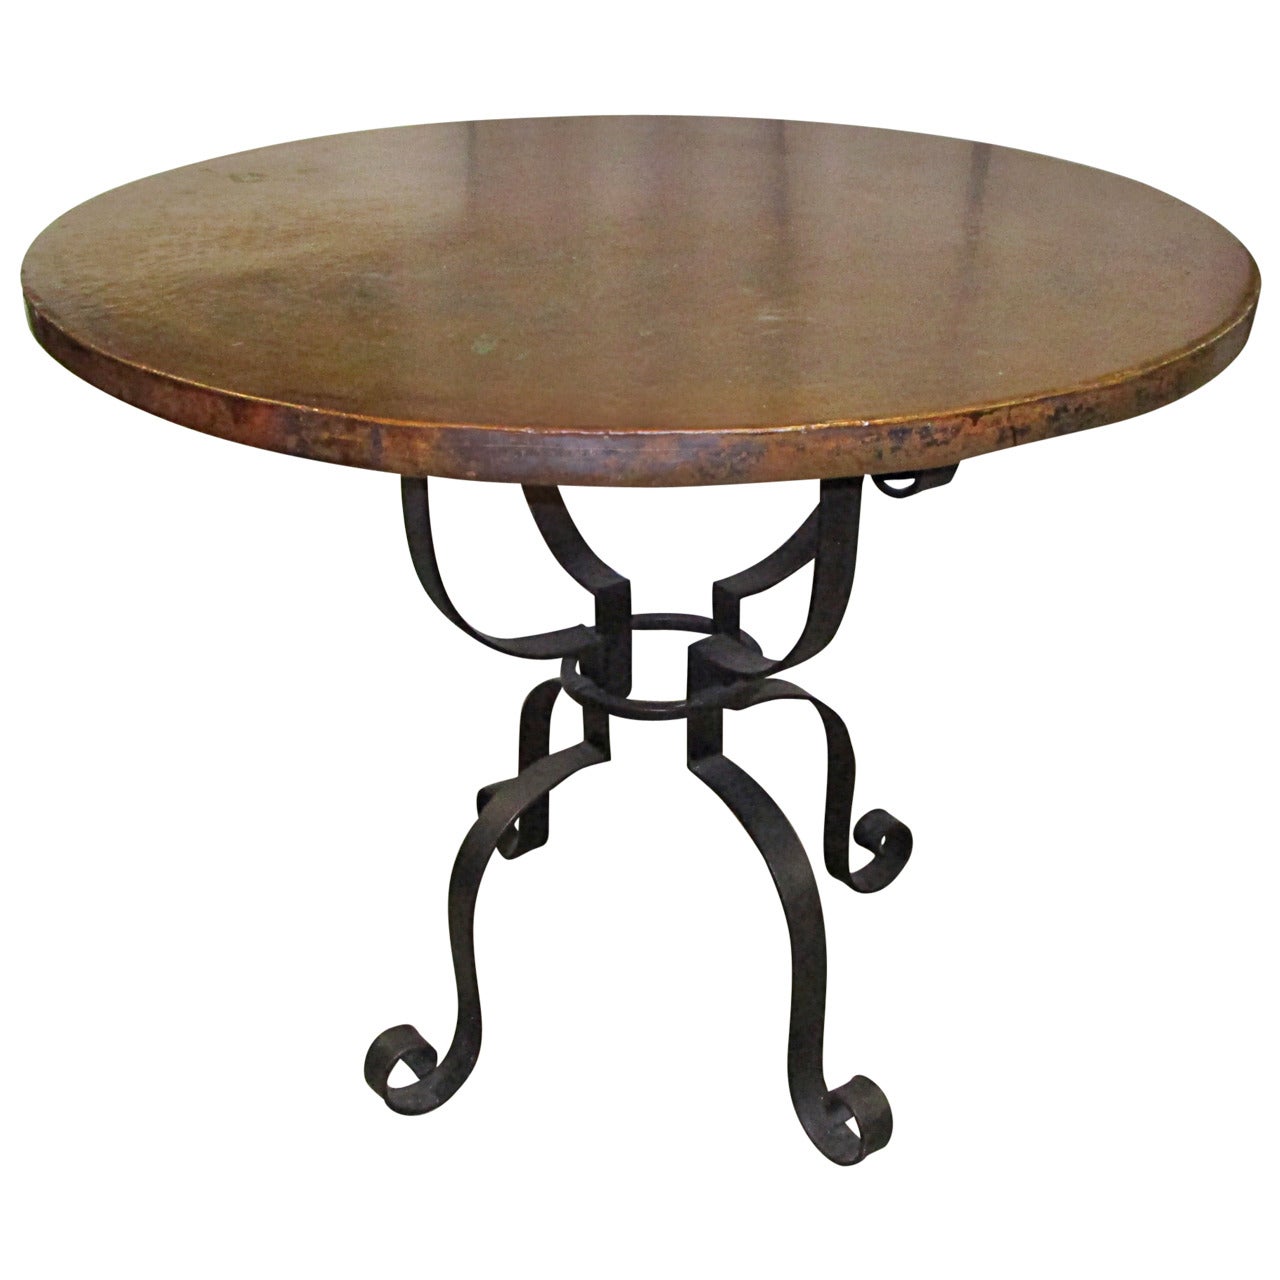 Hammered Copper and Forged Steel Occasional Table